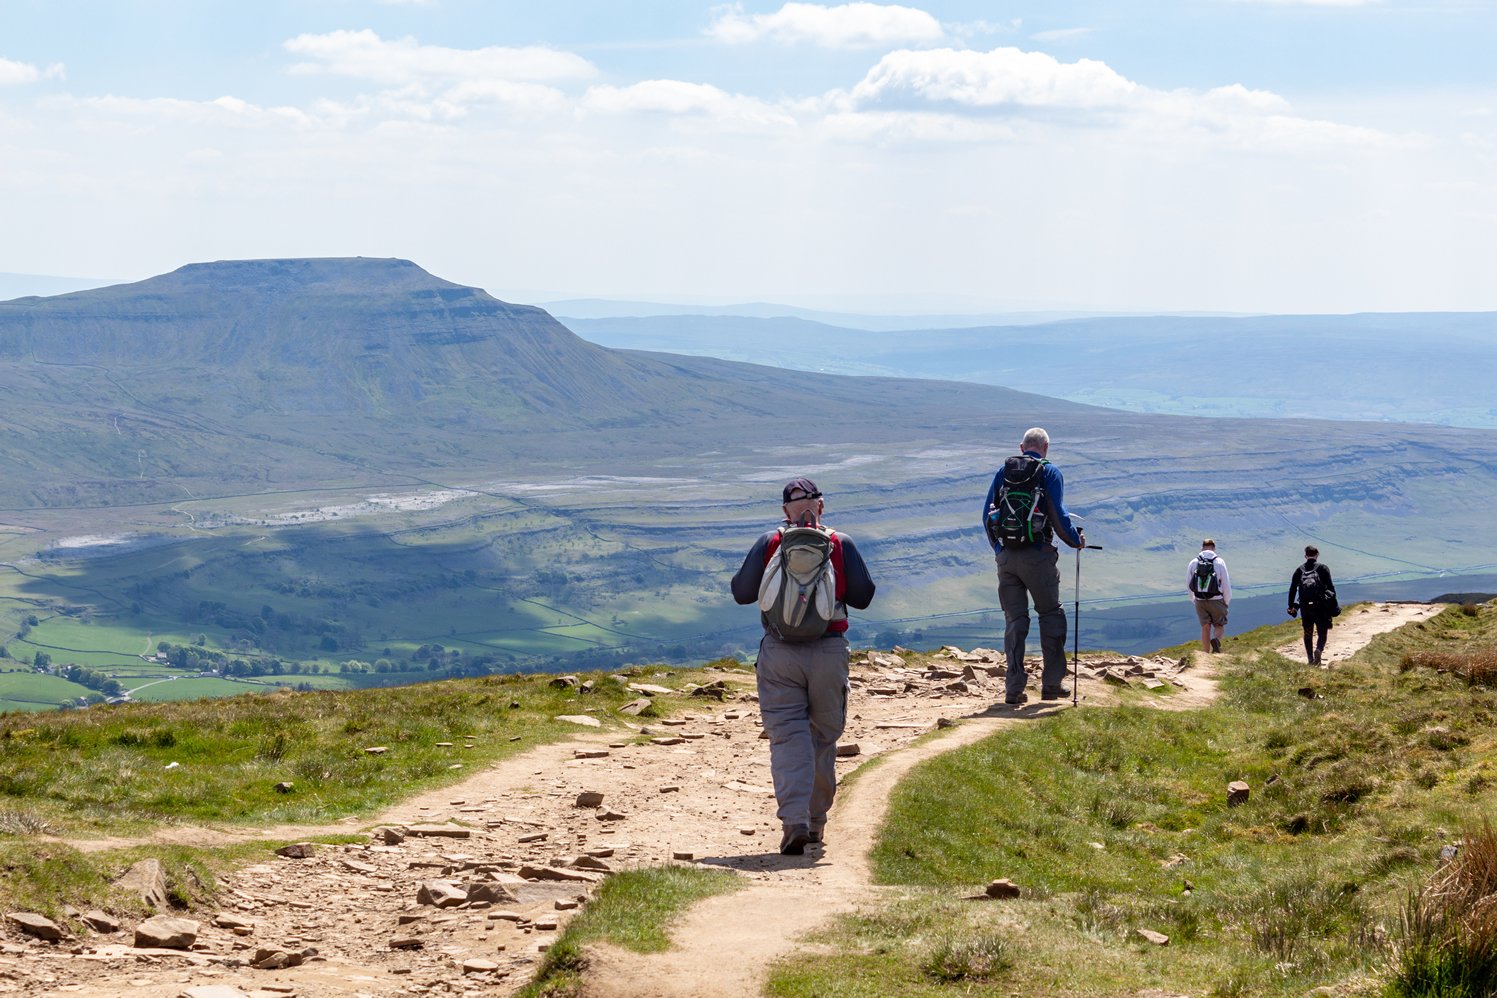 Image name walkers descending whernside view of ingleborough sunny yorkshire the 13 image from the post Stride Out in Yorkshire: Celebrate National Walking Day in Yorkshire.com.